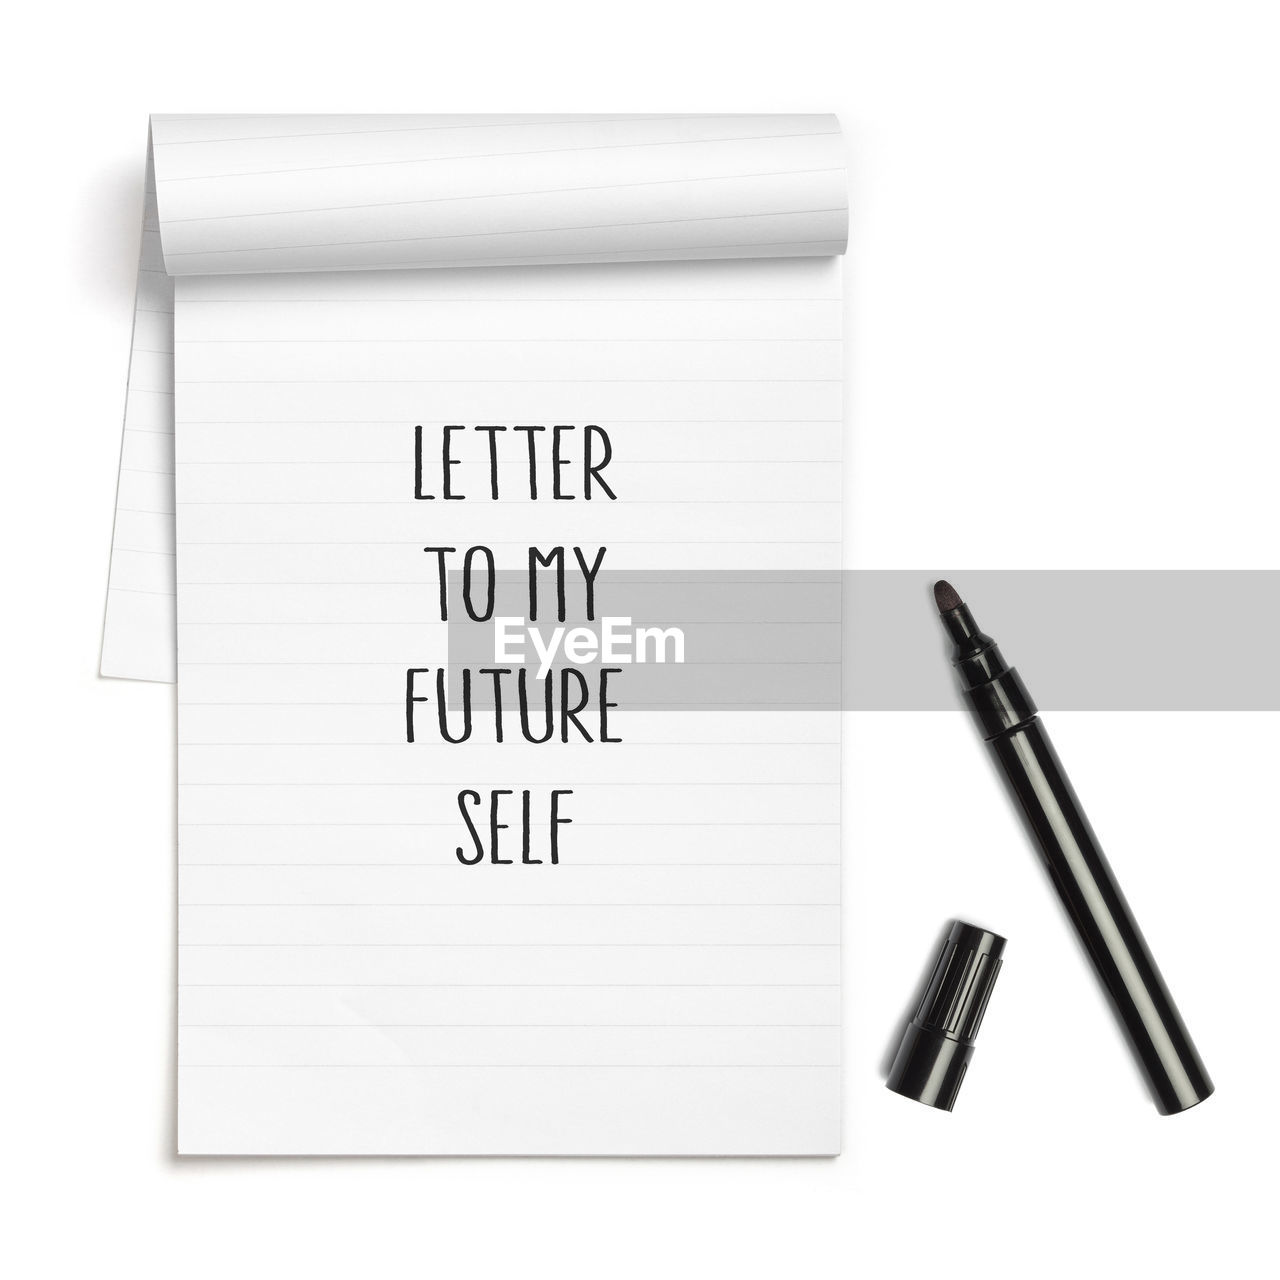 Letter to my future self written on paper notepad